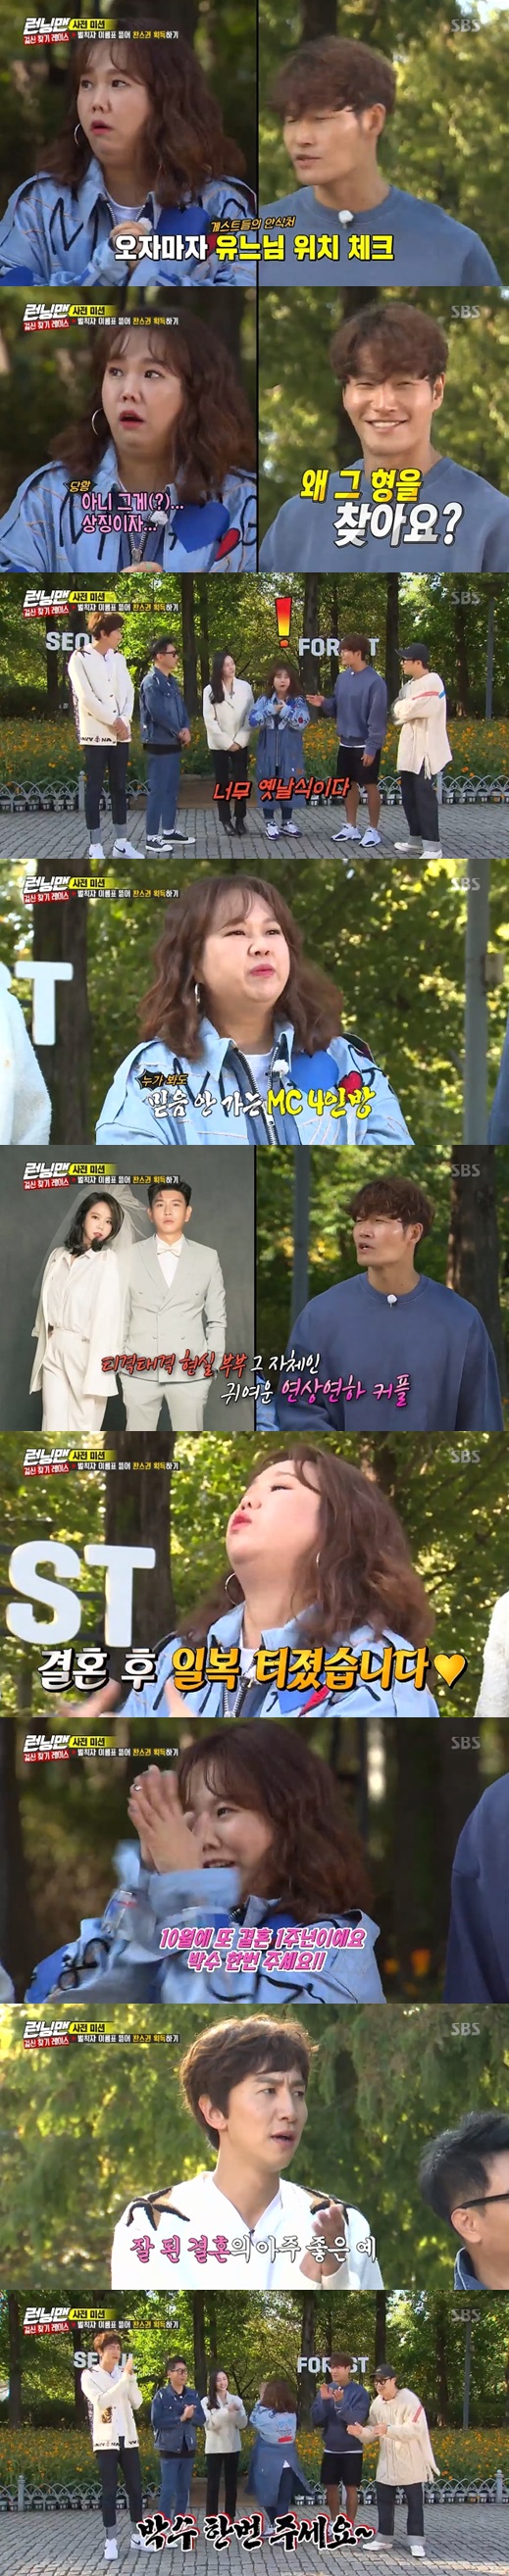 Comedian Hong Hyon-hee delivers on marriage life with husband JasonOn the afternoon of the 3rd, SBS entertainment program Running Man, Comedian Hong Hyon-hee and actor Park Ji-hyun were invited as guests and conducted Girl Finding Race.On this day, Hong Hyon-hee asked, Where is your sister, Yoo Jae-Suk? And said, Where should I look and talk?Yoo Jae-Suk was hiding in the park with a dressing penalty, and Kim Jong-guk added, Its too old to ride the line. You should not ride the line like this.The members then celebrated their marriage with their younger husband, Jason.Hong Hyon-hee said, I spent a year after marriage, I did my activities for 10 years. I collected money for the first time.In October, I am the first anniversary of marriage. Please applaud me.